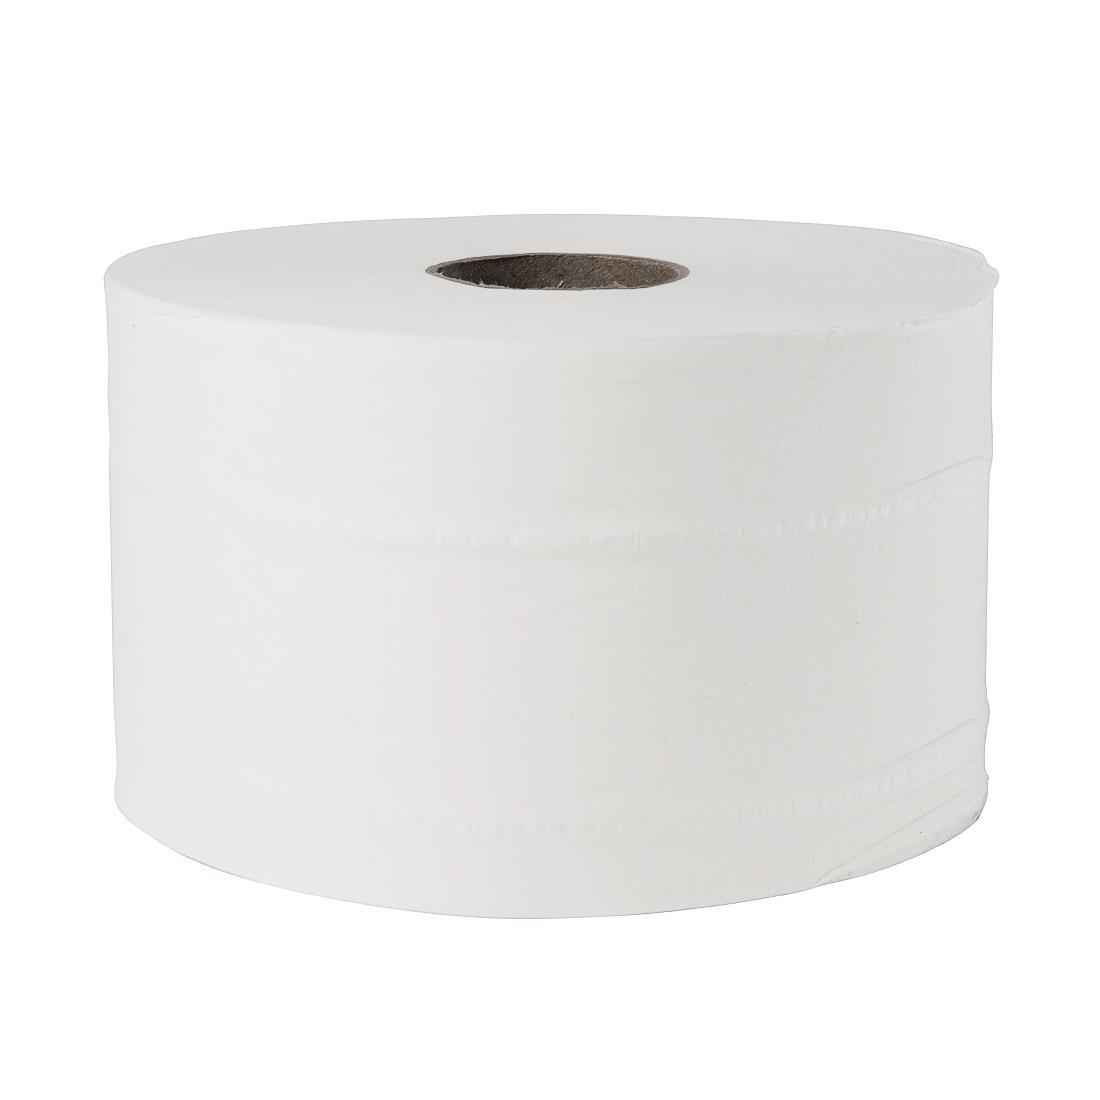 Jantex Micro Twin Toilet Paper 2-Ply 125m (Pack of 24) - GL063  - 1